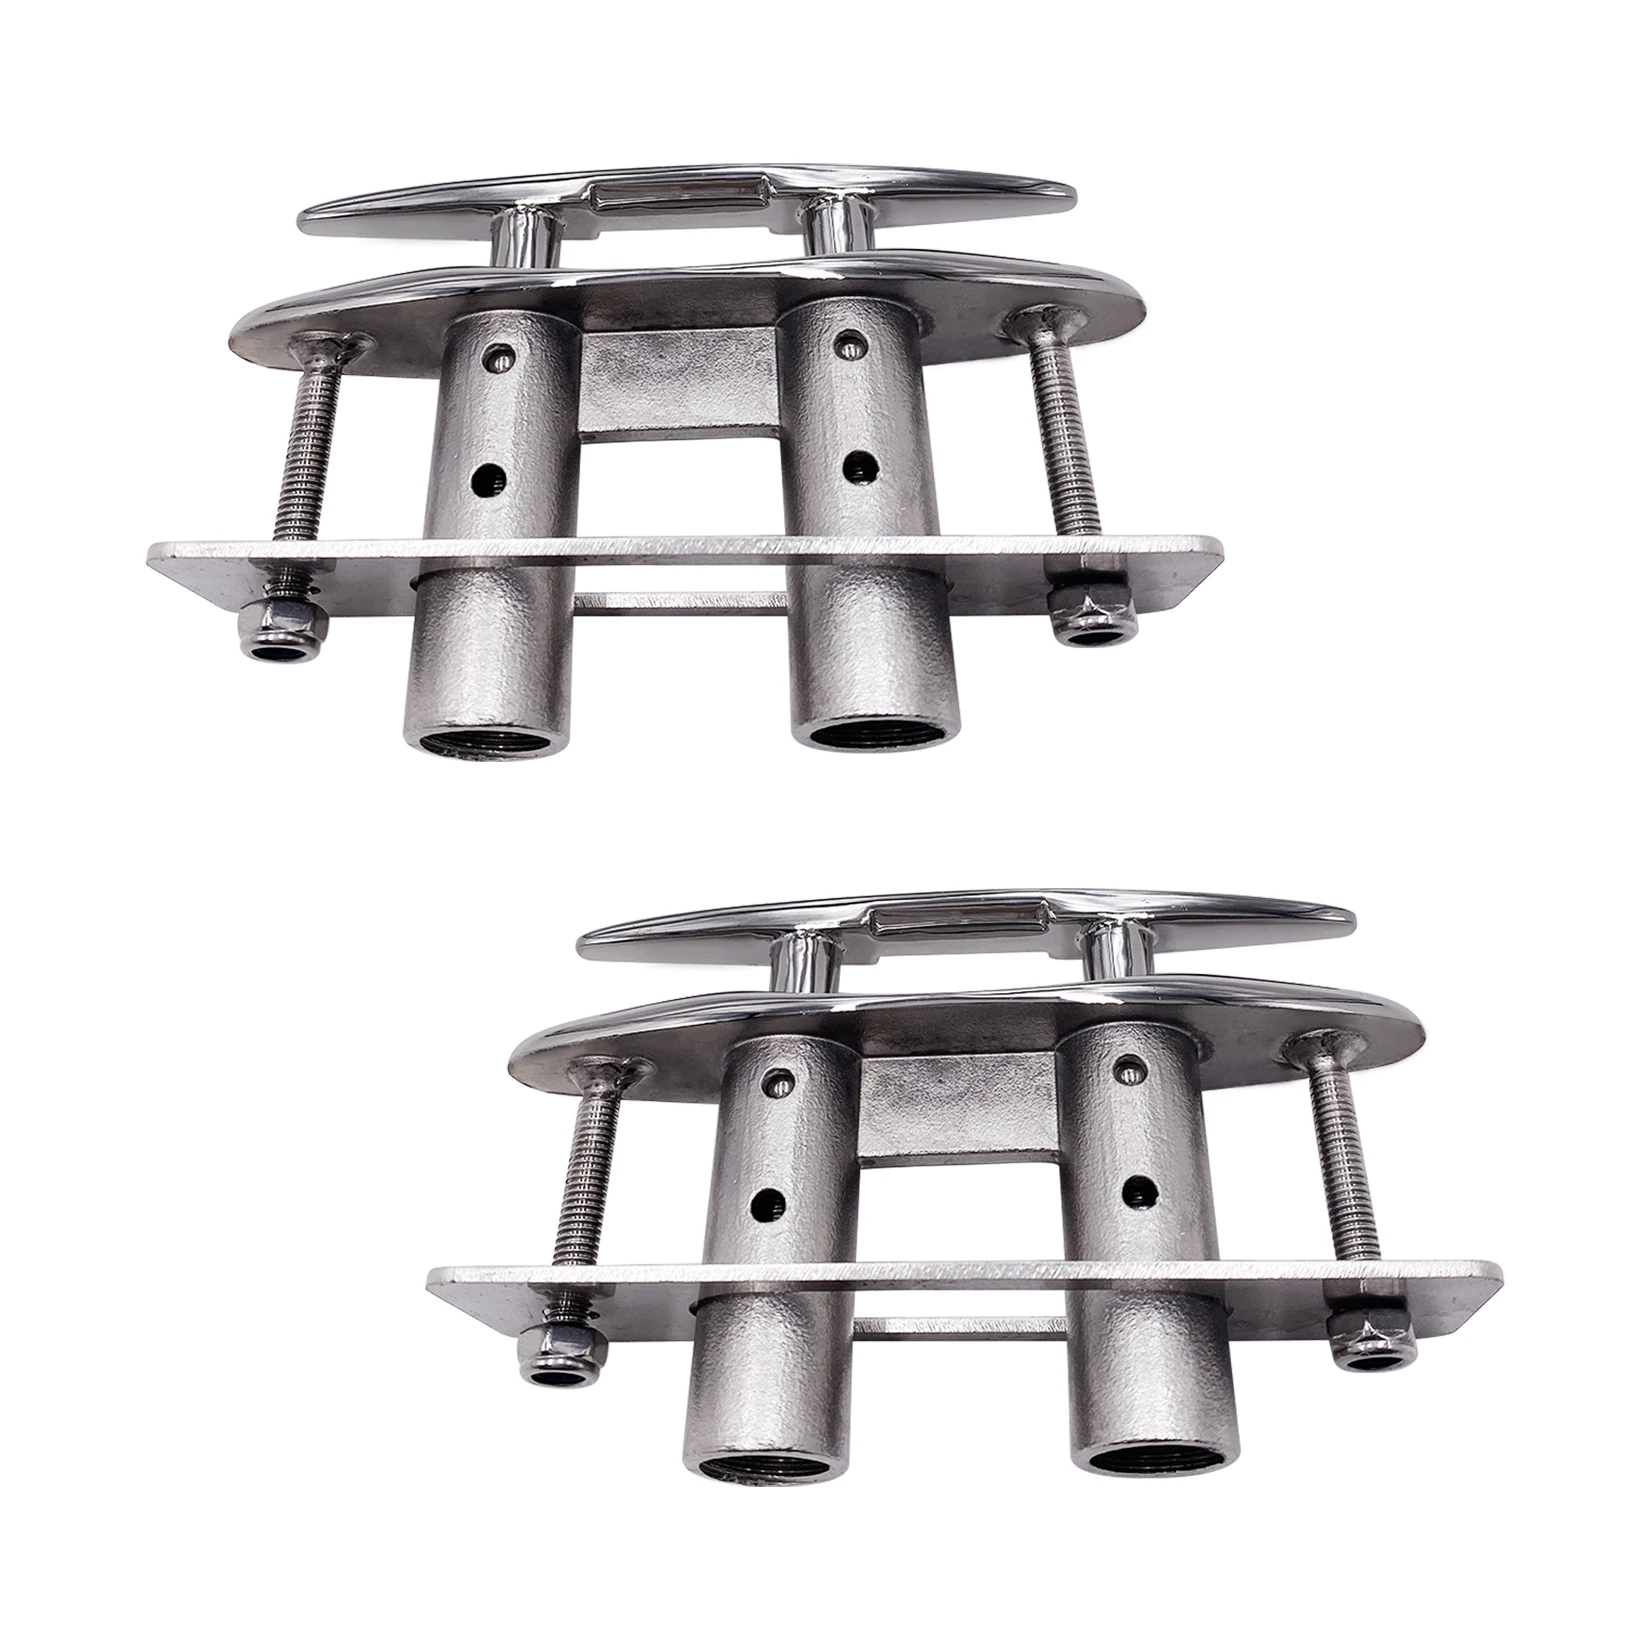 2 Pcs 5 inch Boat Pull Up Cleat Marine Docking Stainless Steel 316 Pop Up Cleat Flush Mount Dock Retractable Cleat enlarge